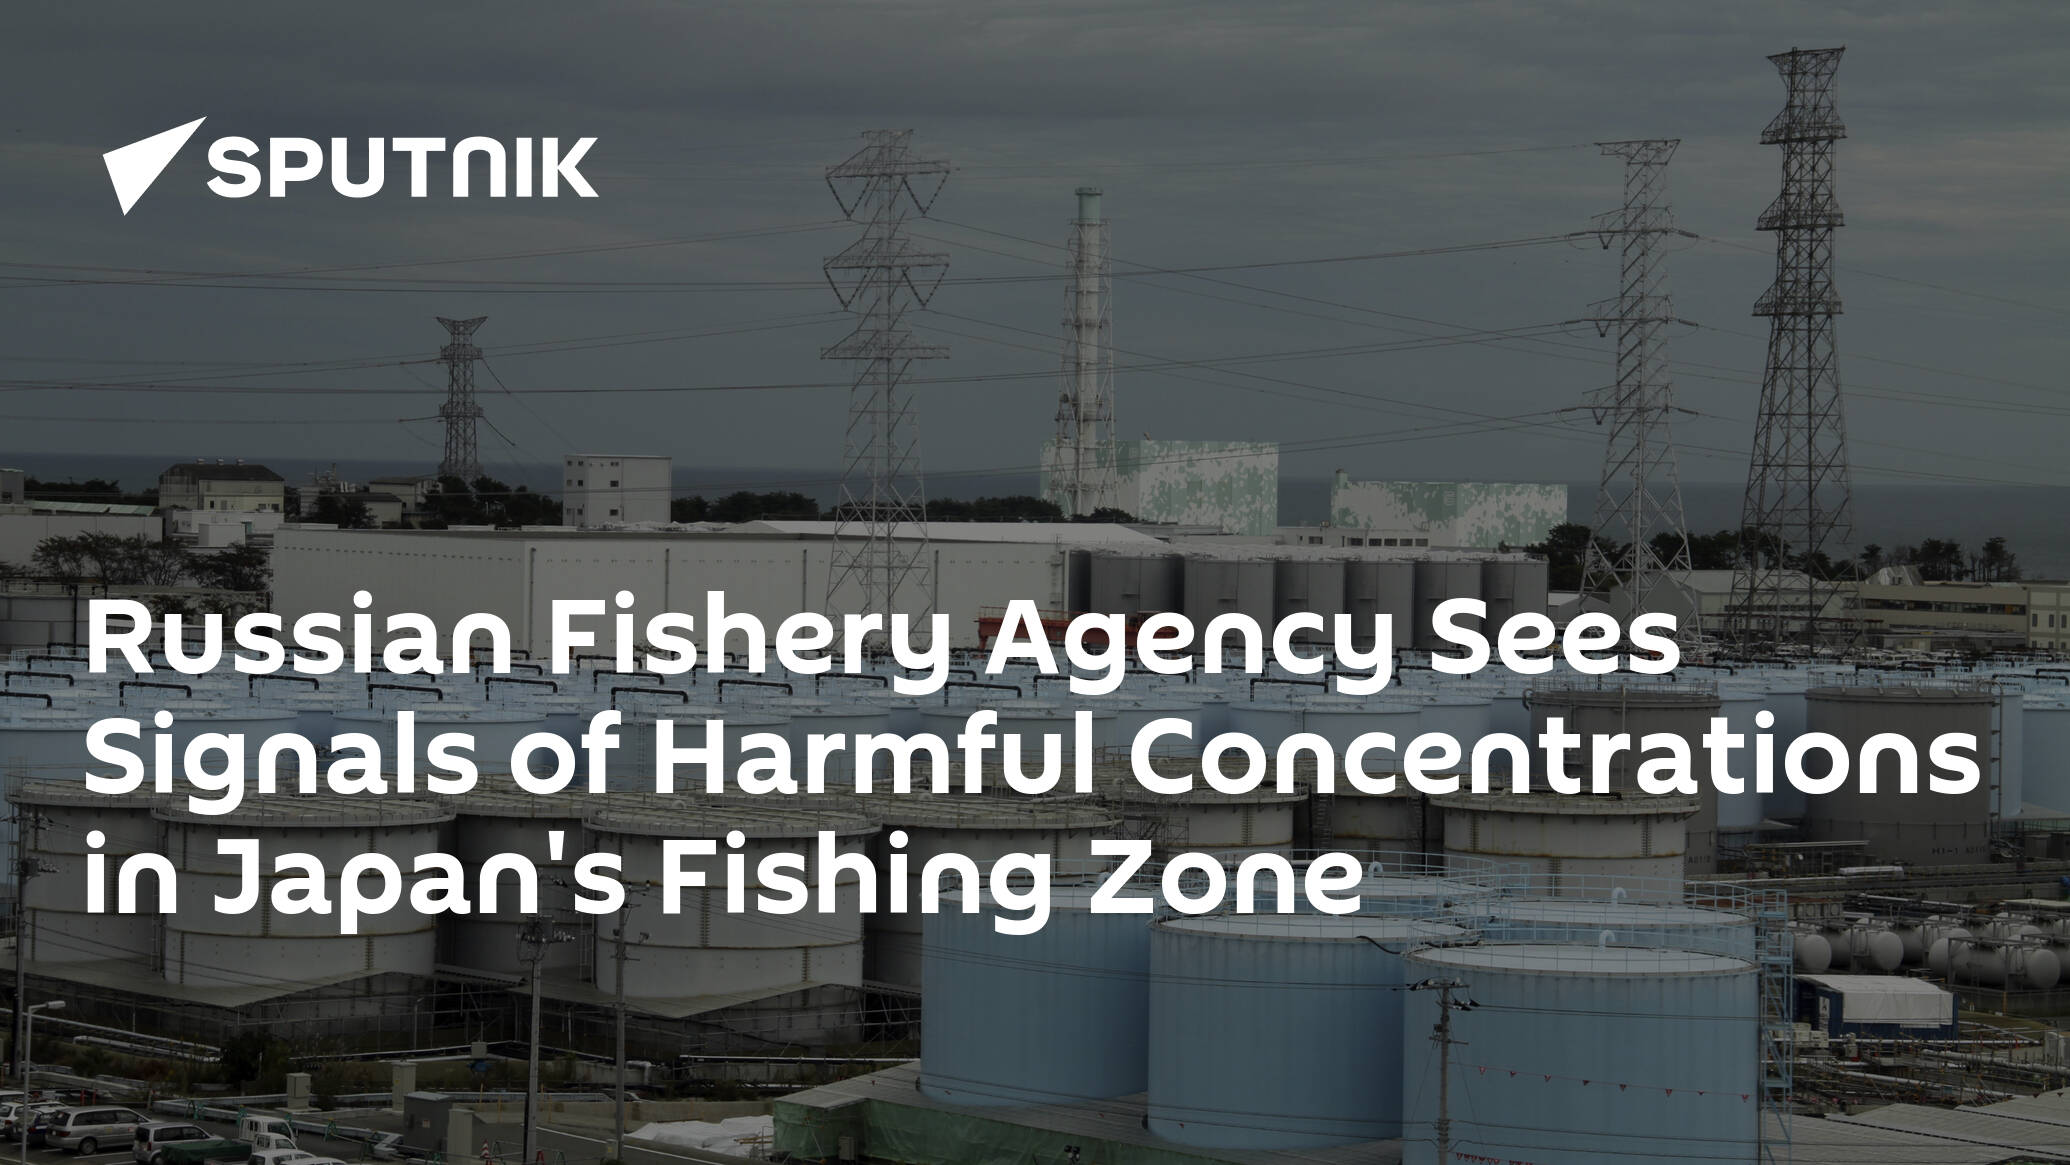 Russian Fishery Agency Sees Signals of Harmful Concentrations in Japan's Fishing Zone